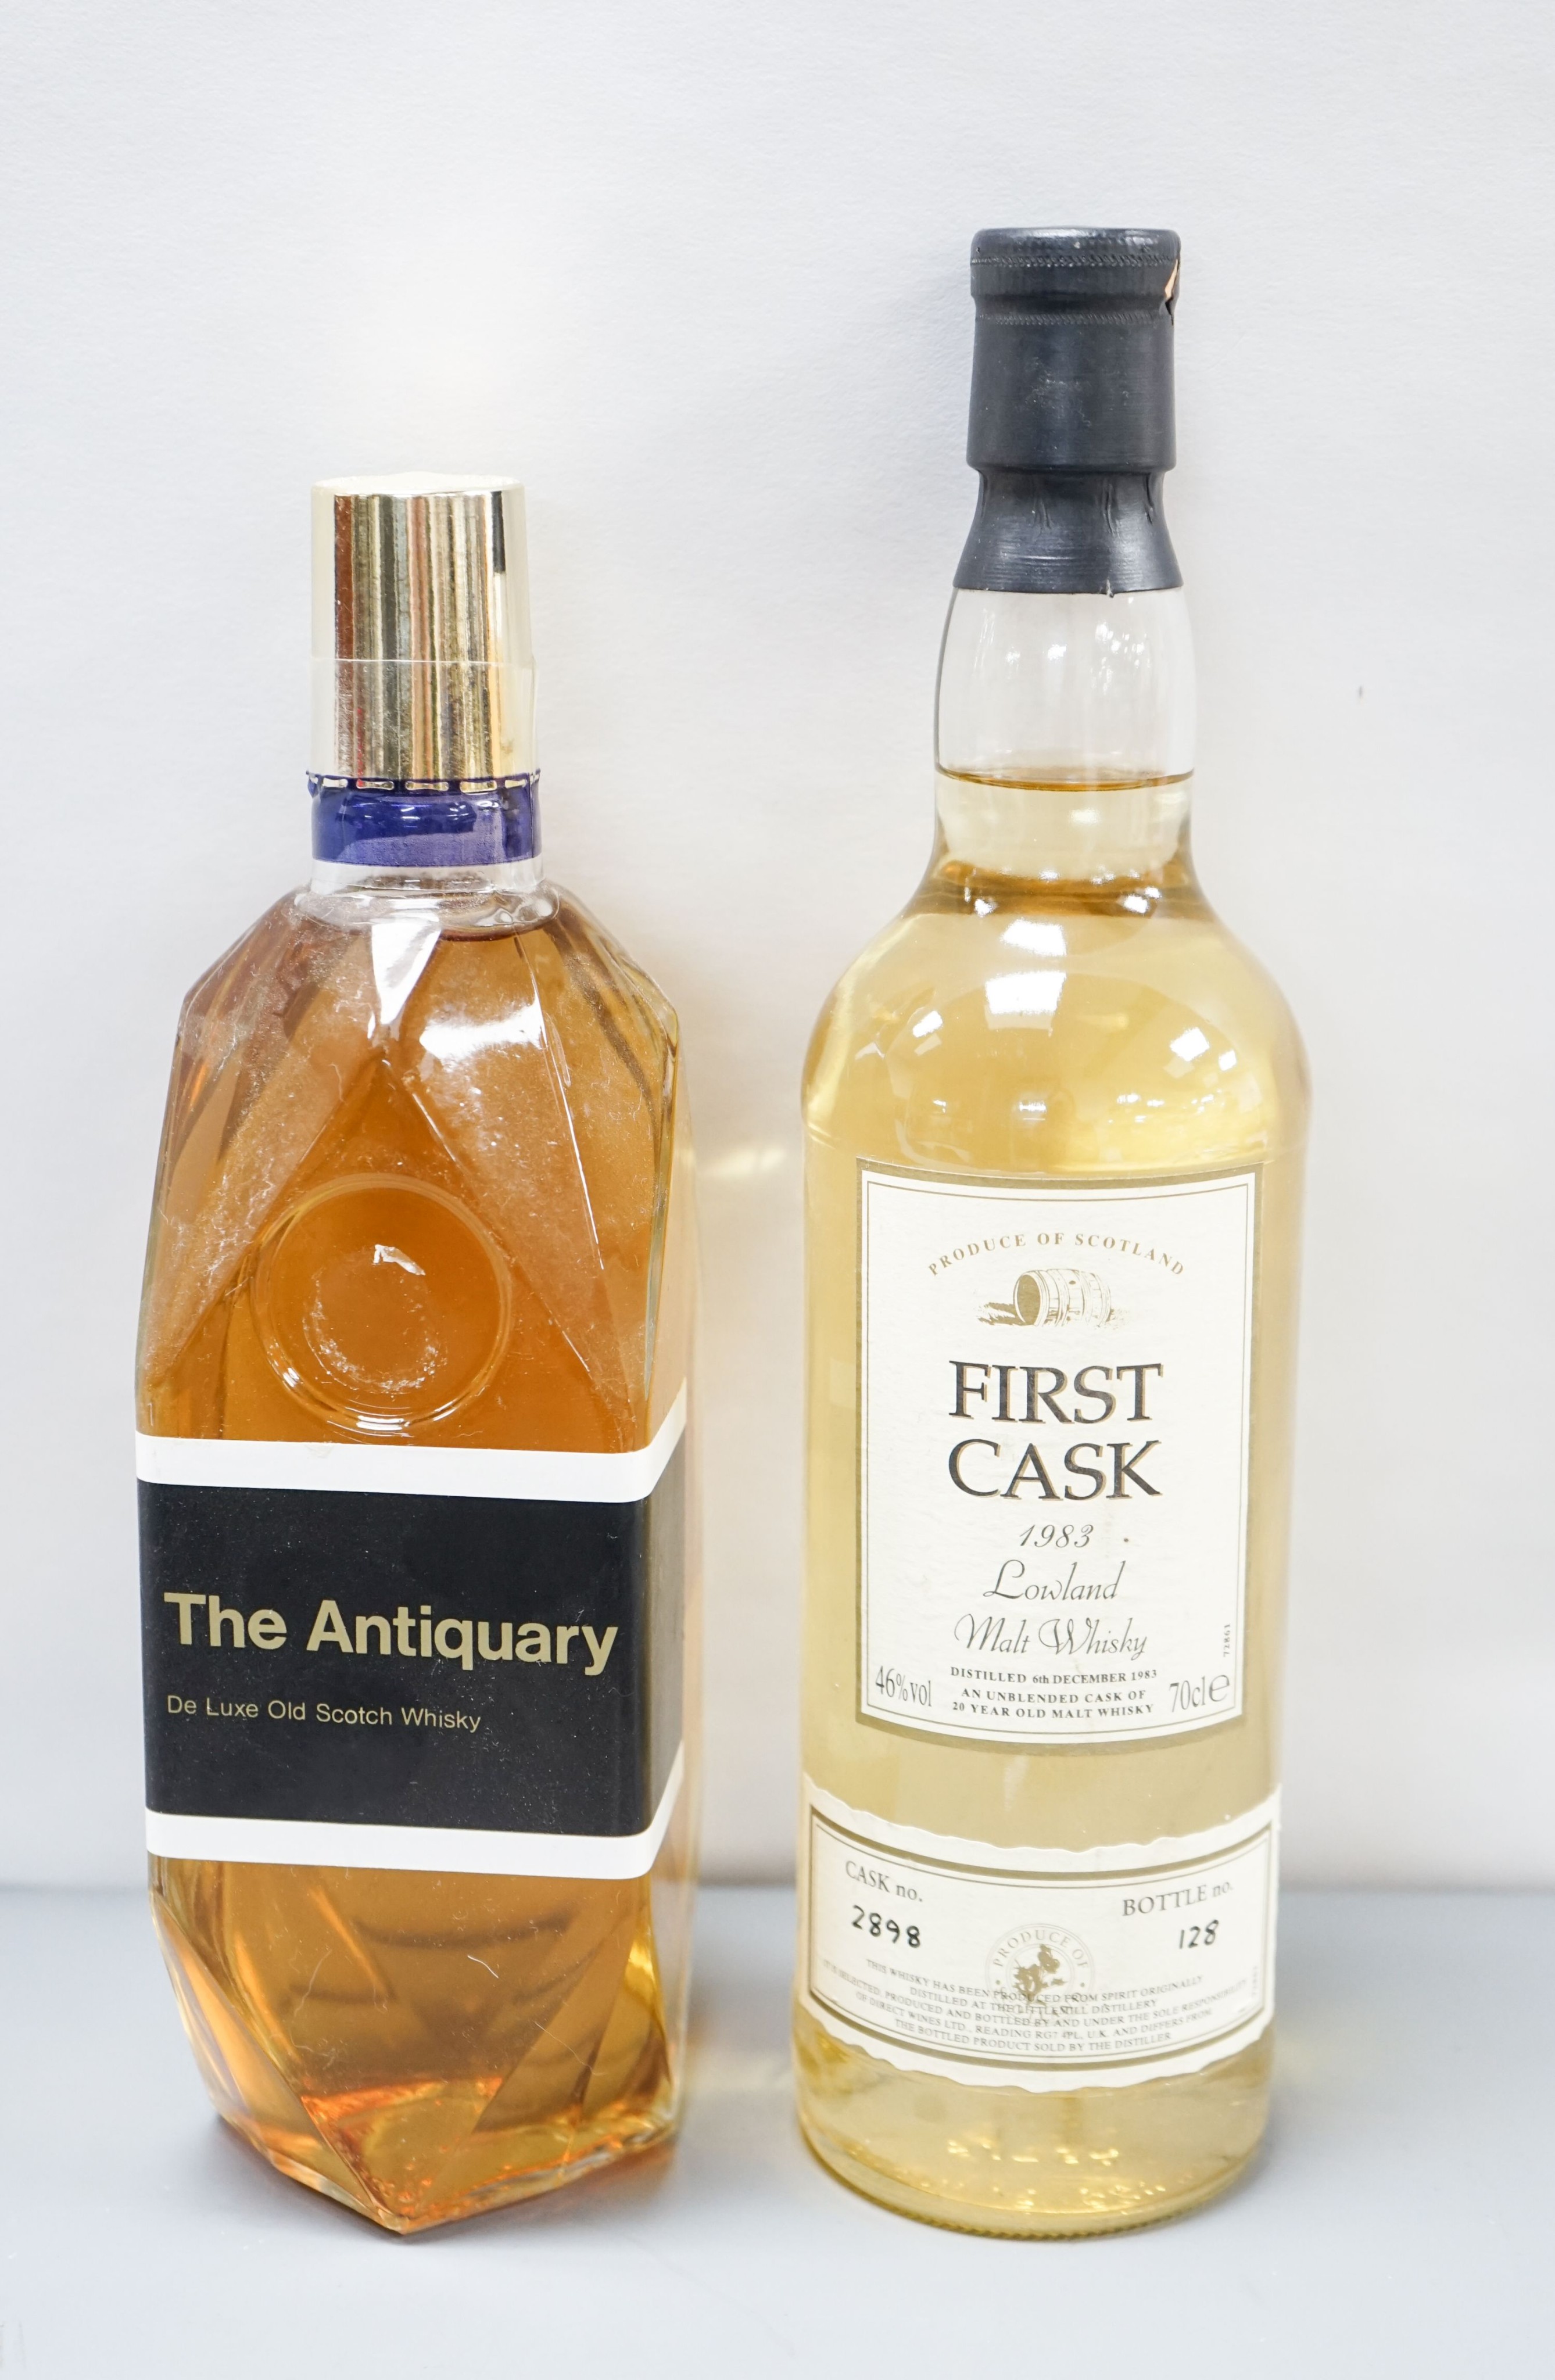 A bottle of First Cask 1983 Lowland whisky, no.128 and a bottle of The Antiquary whisky